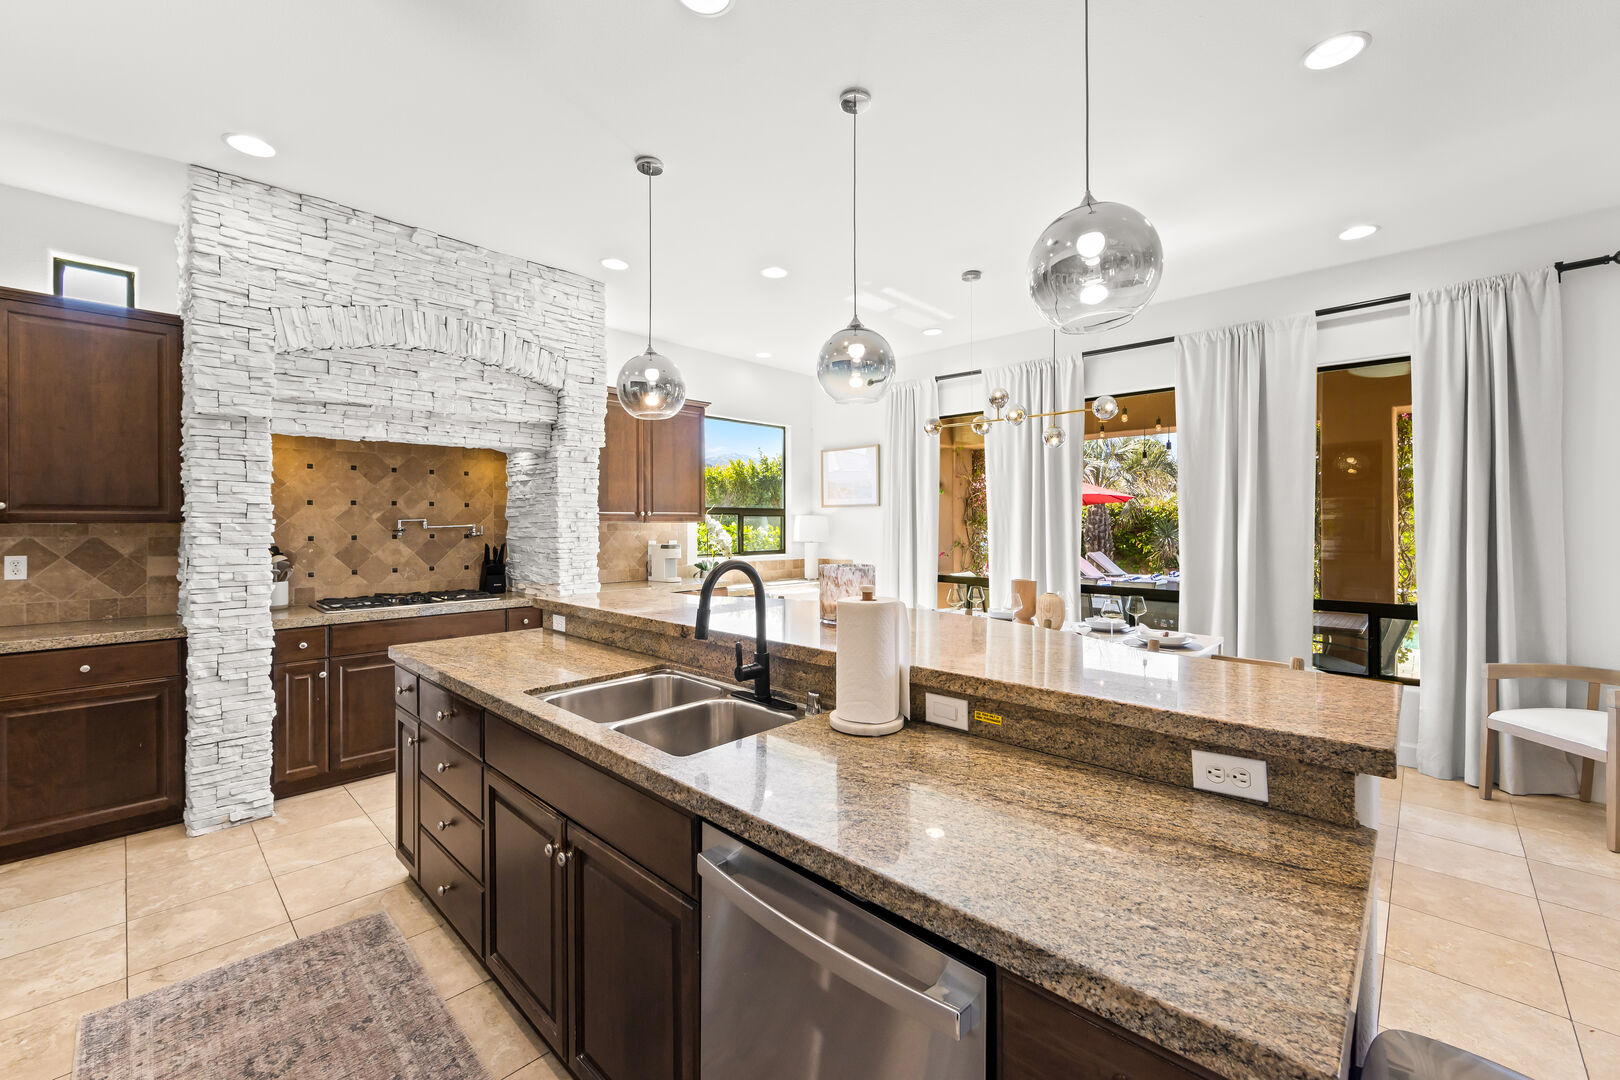 Granite countertops make for easy cleanup!